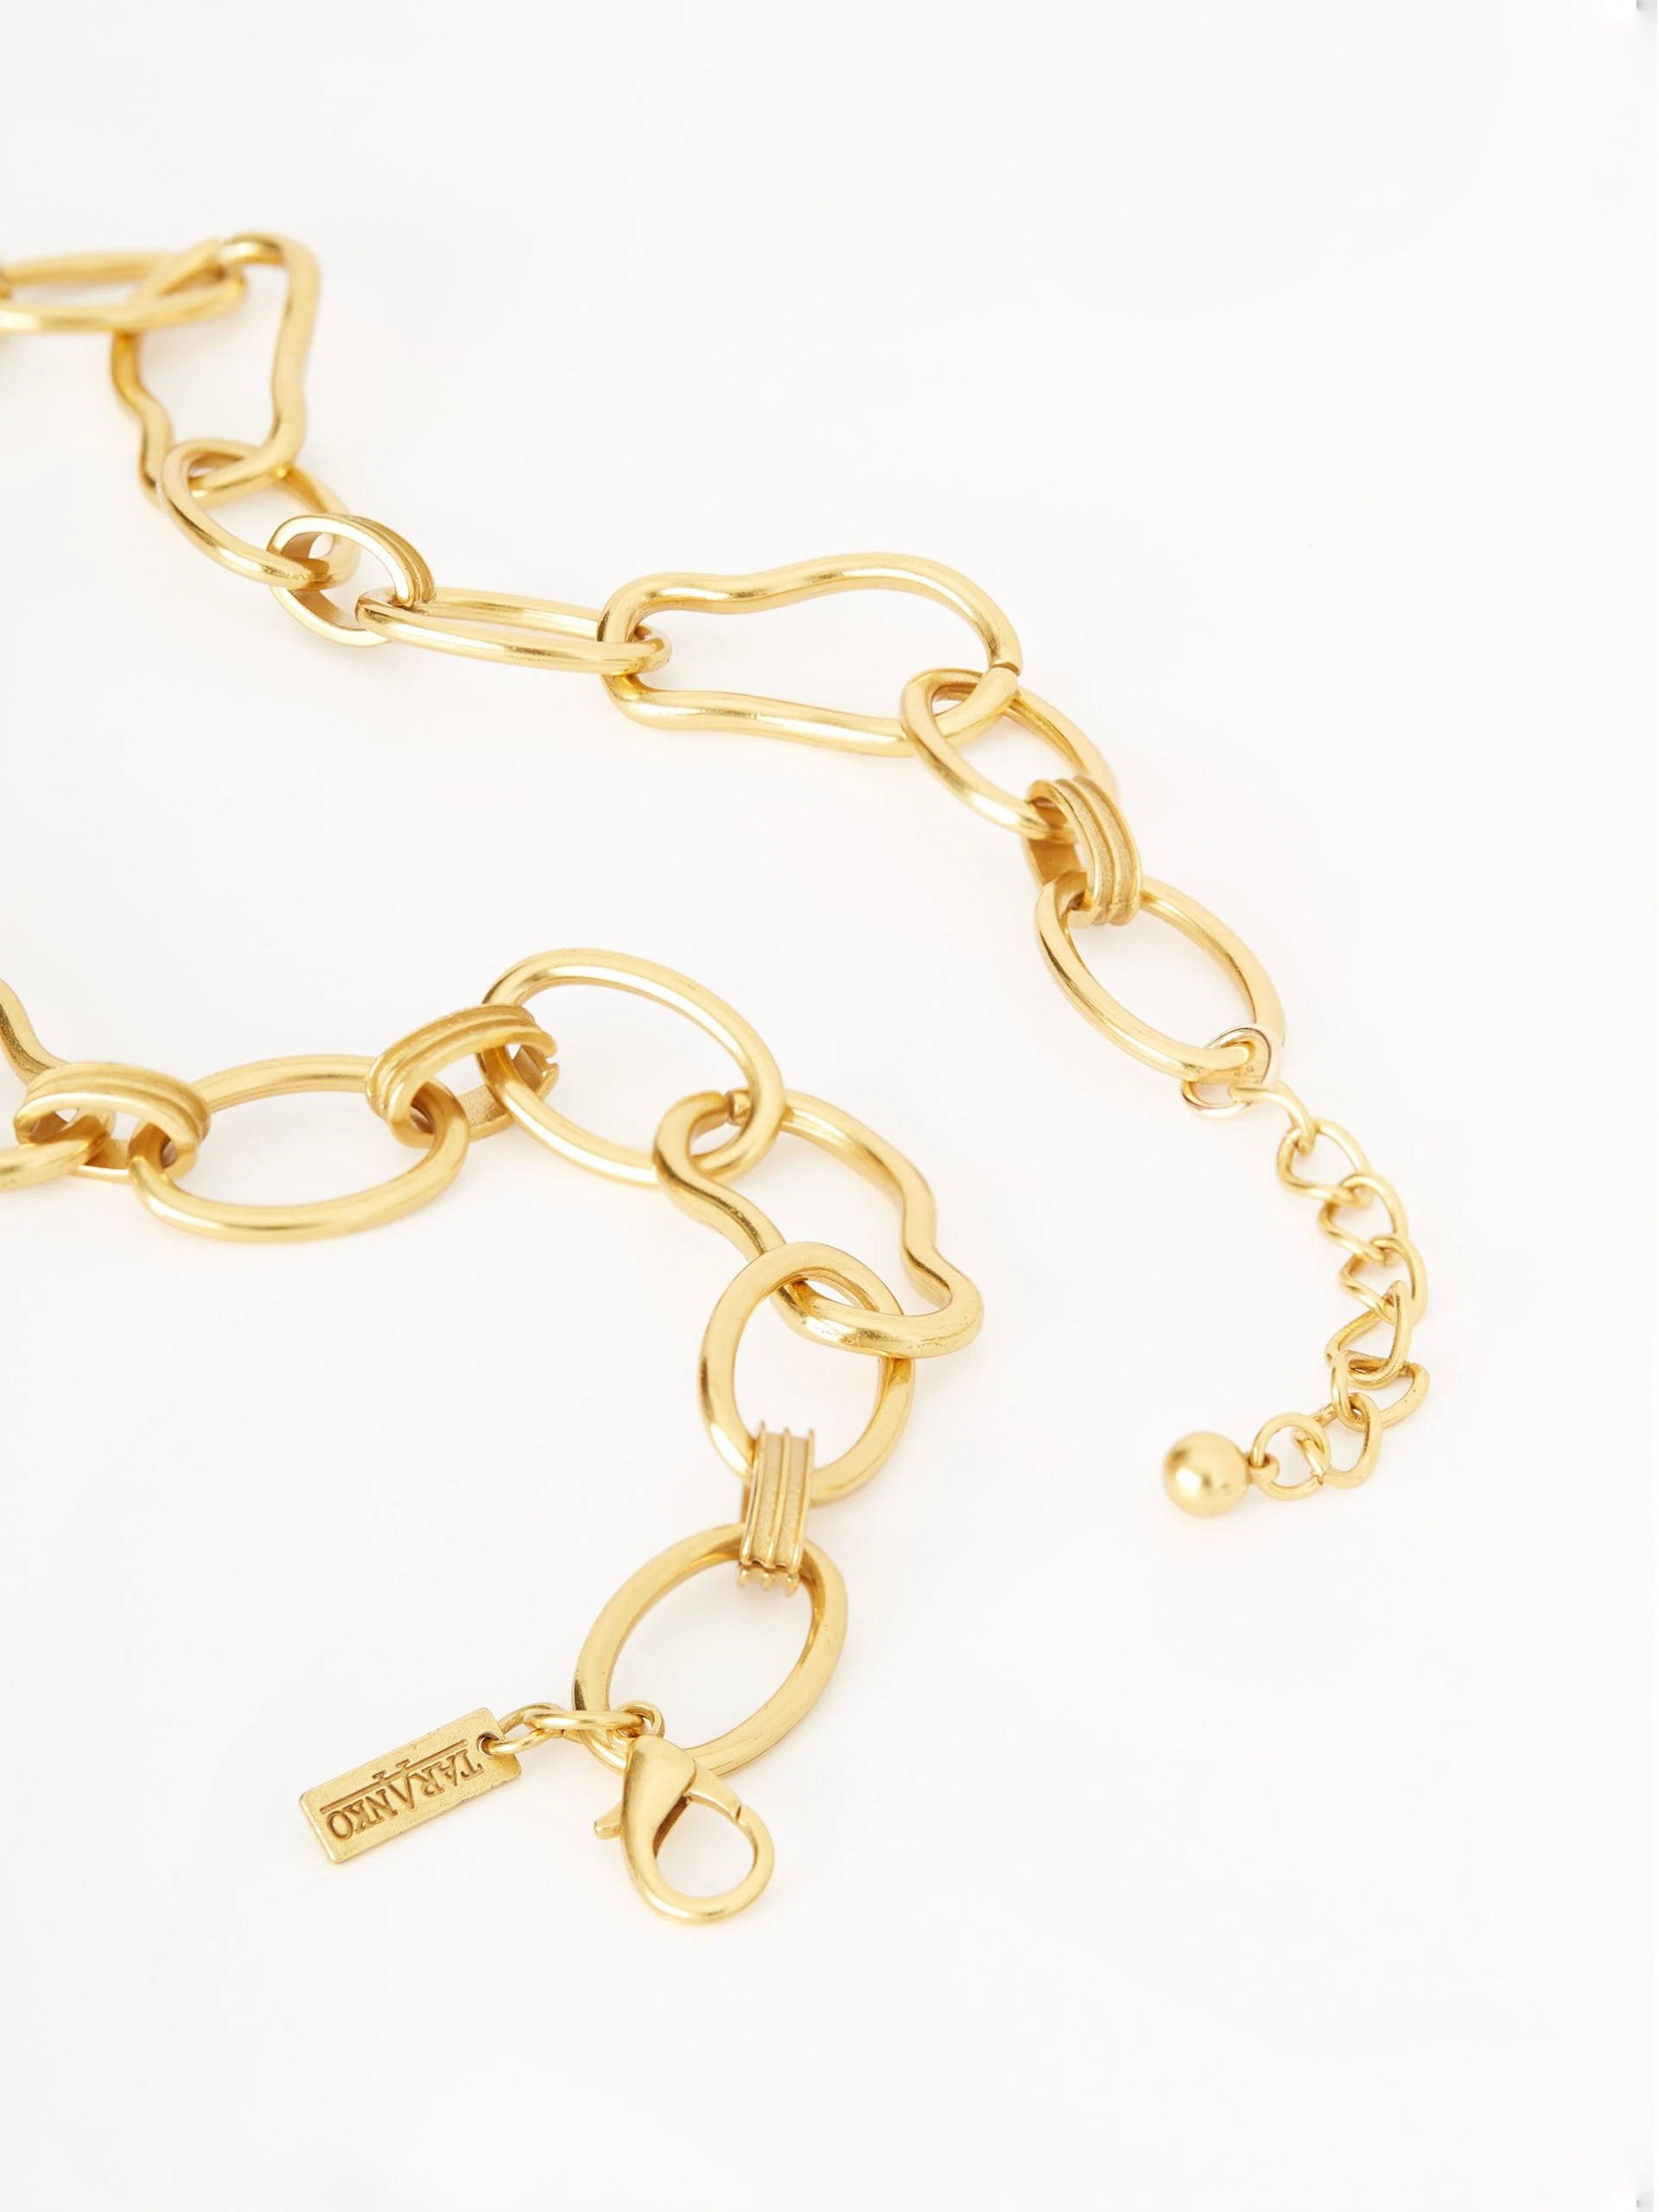 Chain necklace in gold color